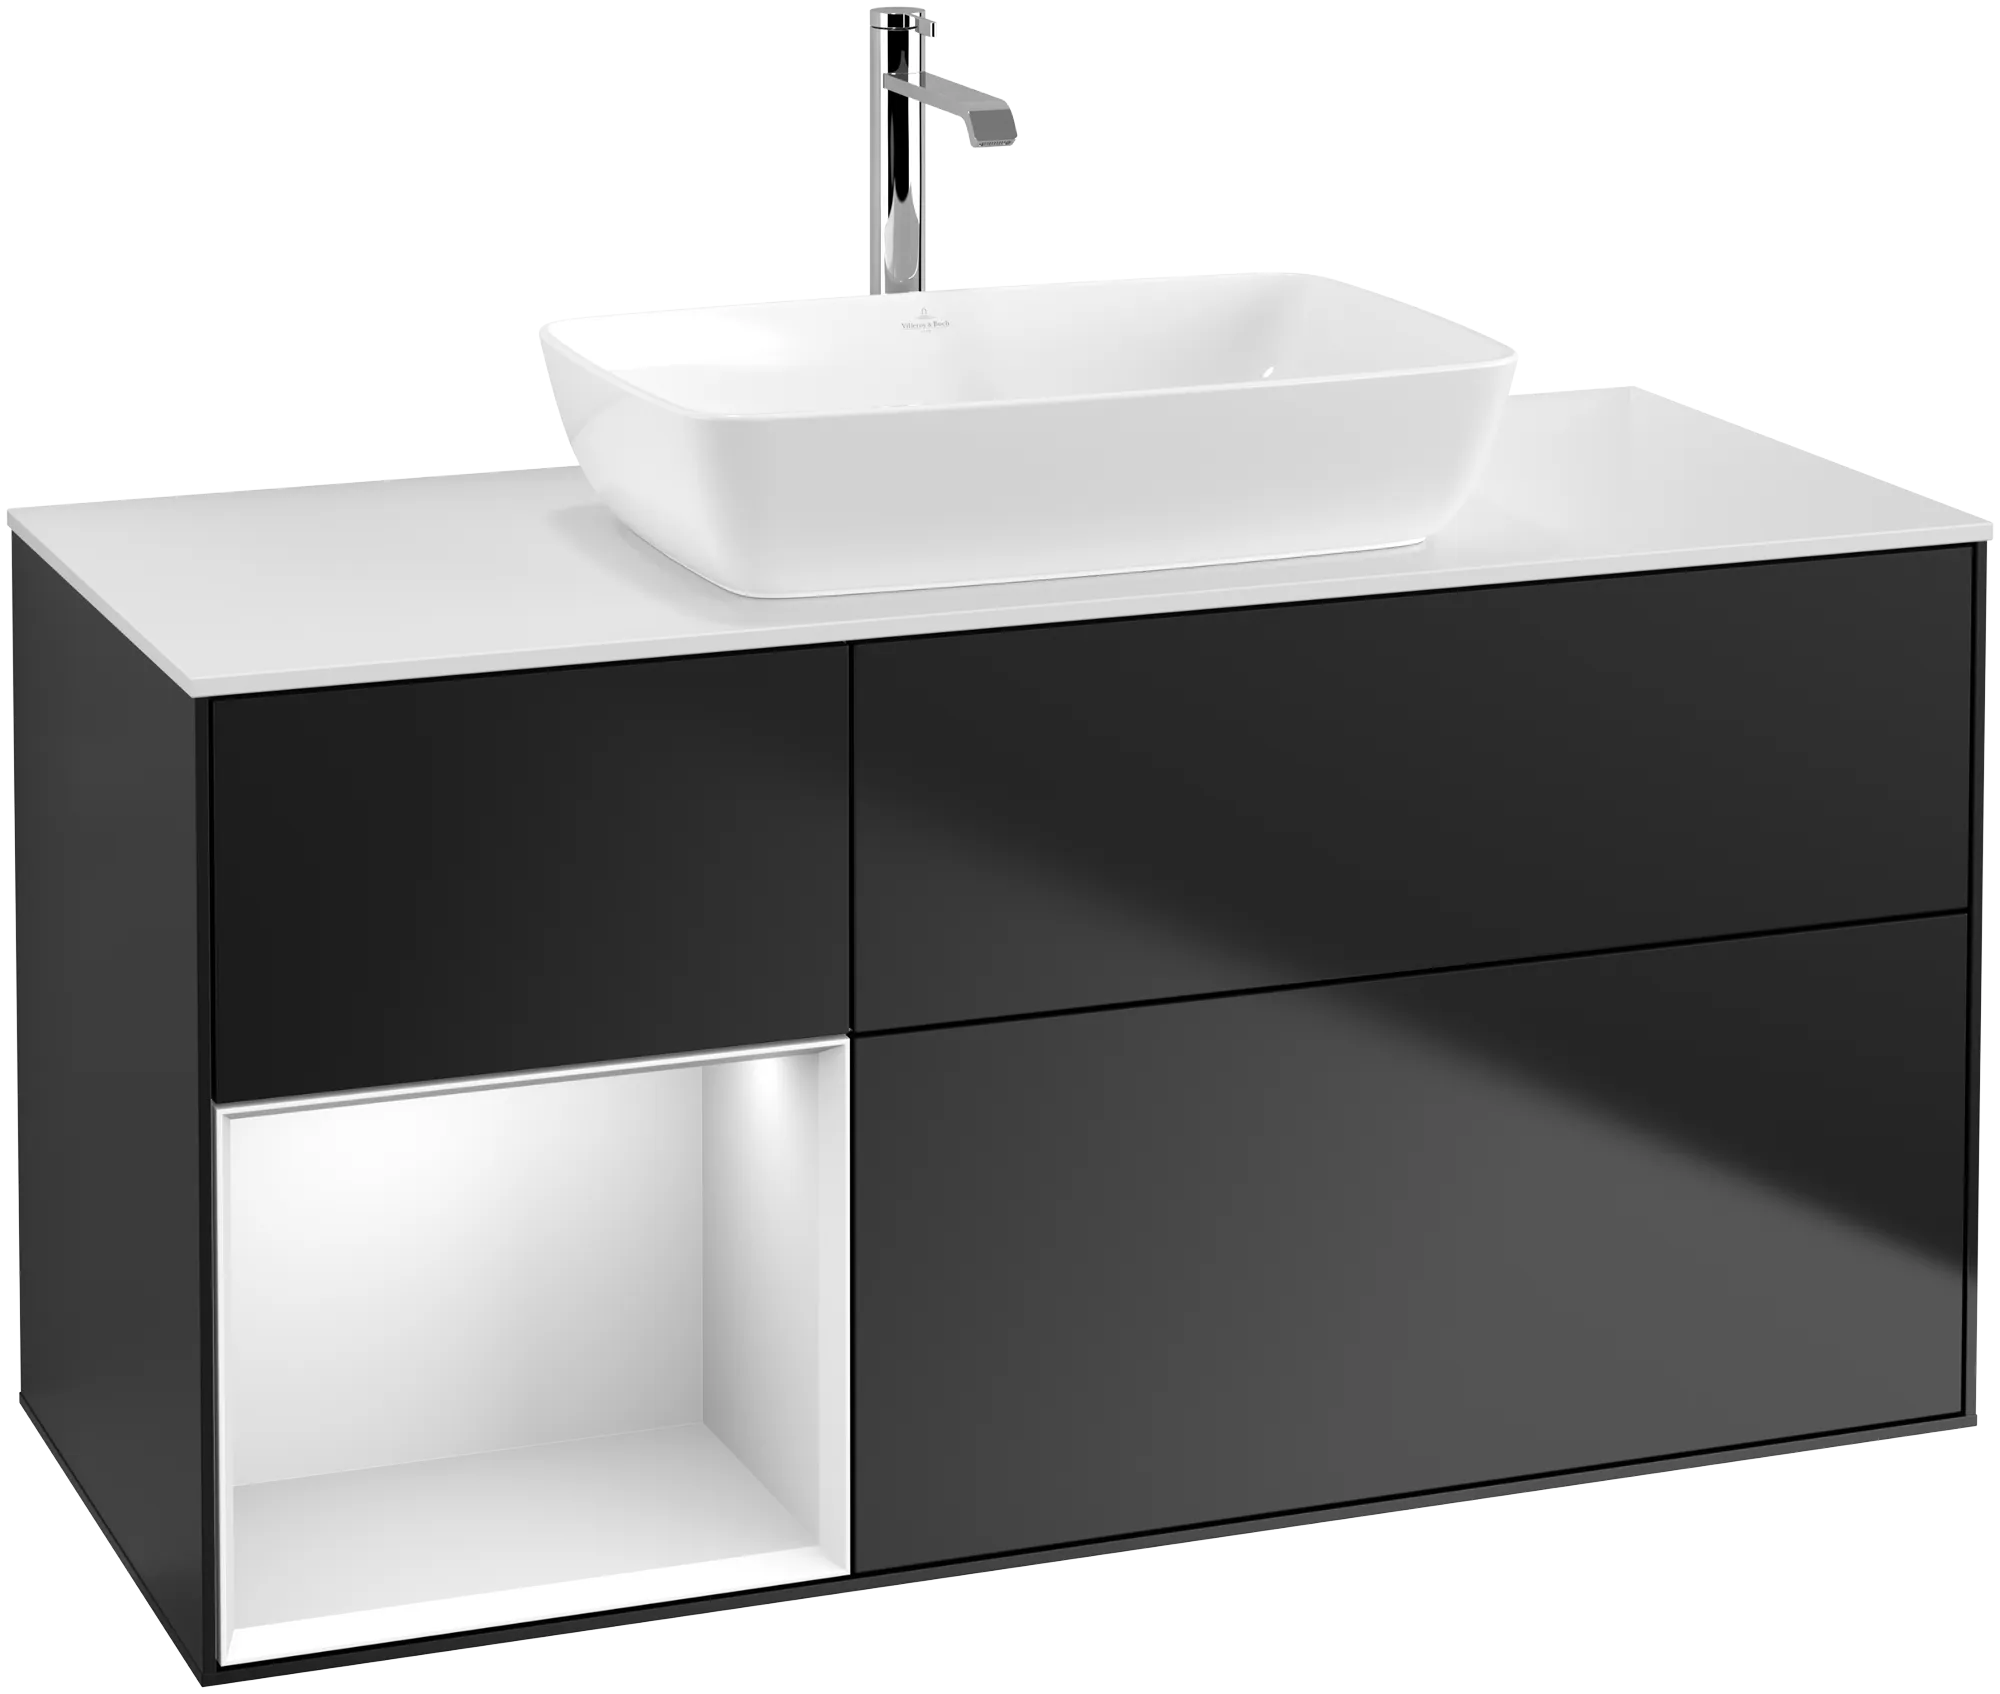 Obrázek VILLEROY BOCH Finion Vanity unit, with lighting, 3 pull-out compartments, 1200 x 603 x 501 mm, Black Matt Lacquer / White Matt Lacquer / Glass White Matt #G821MTPD